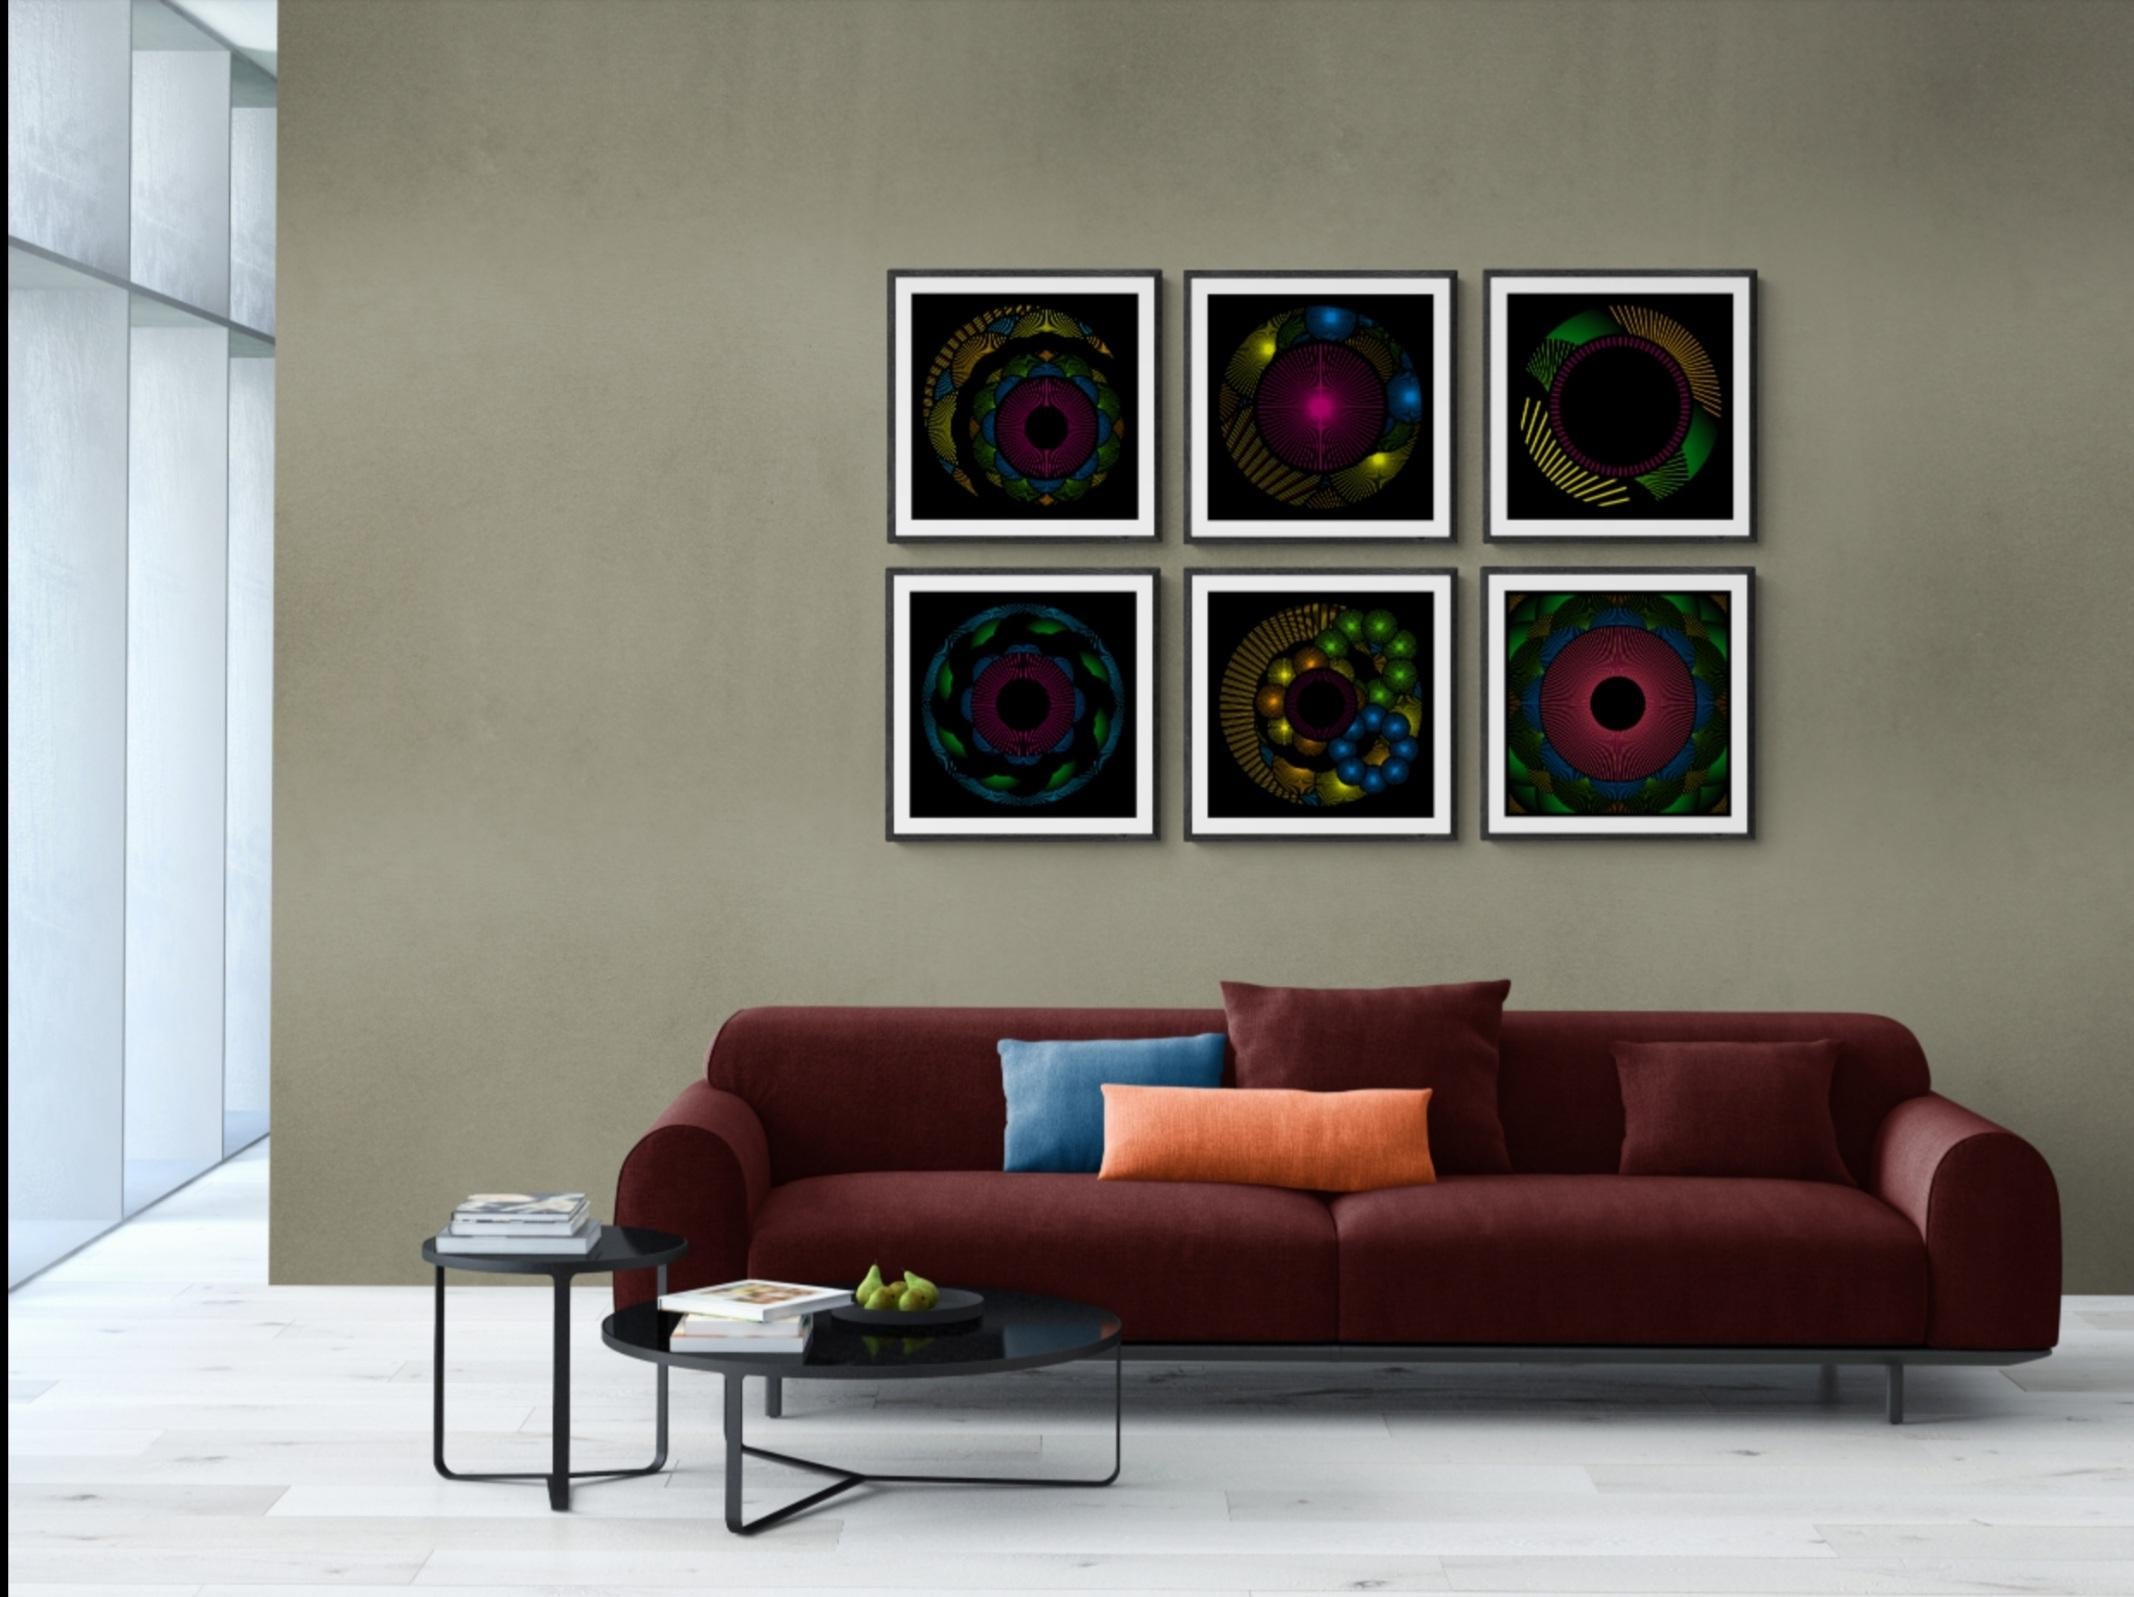 Nebulosa 30 - Abstract Geometric Print by Julio Campos